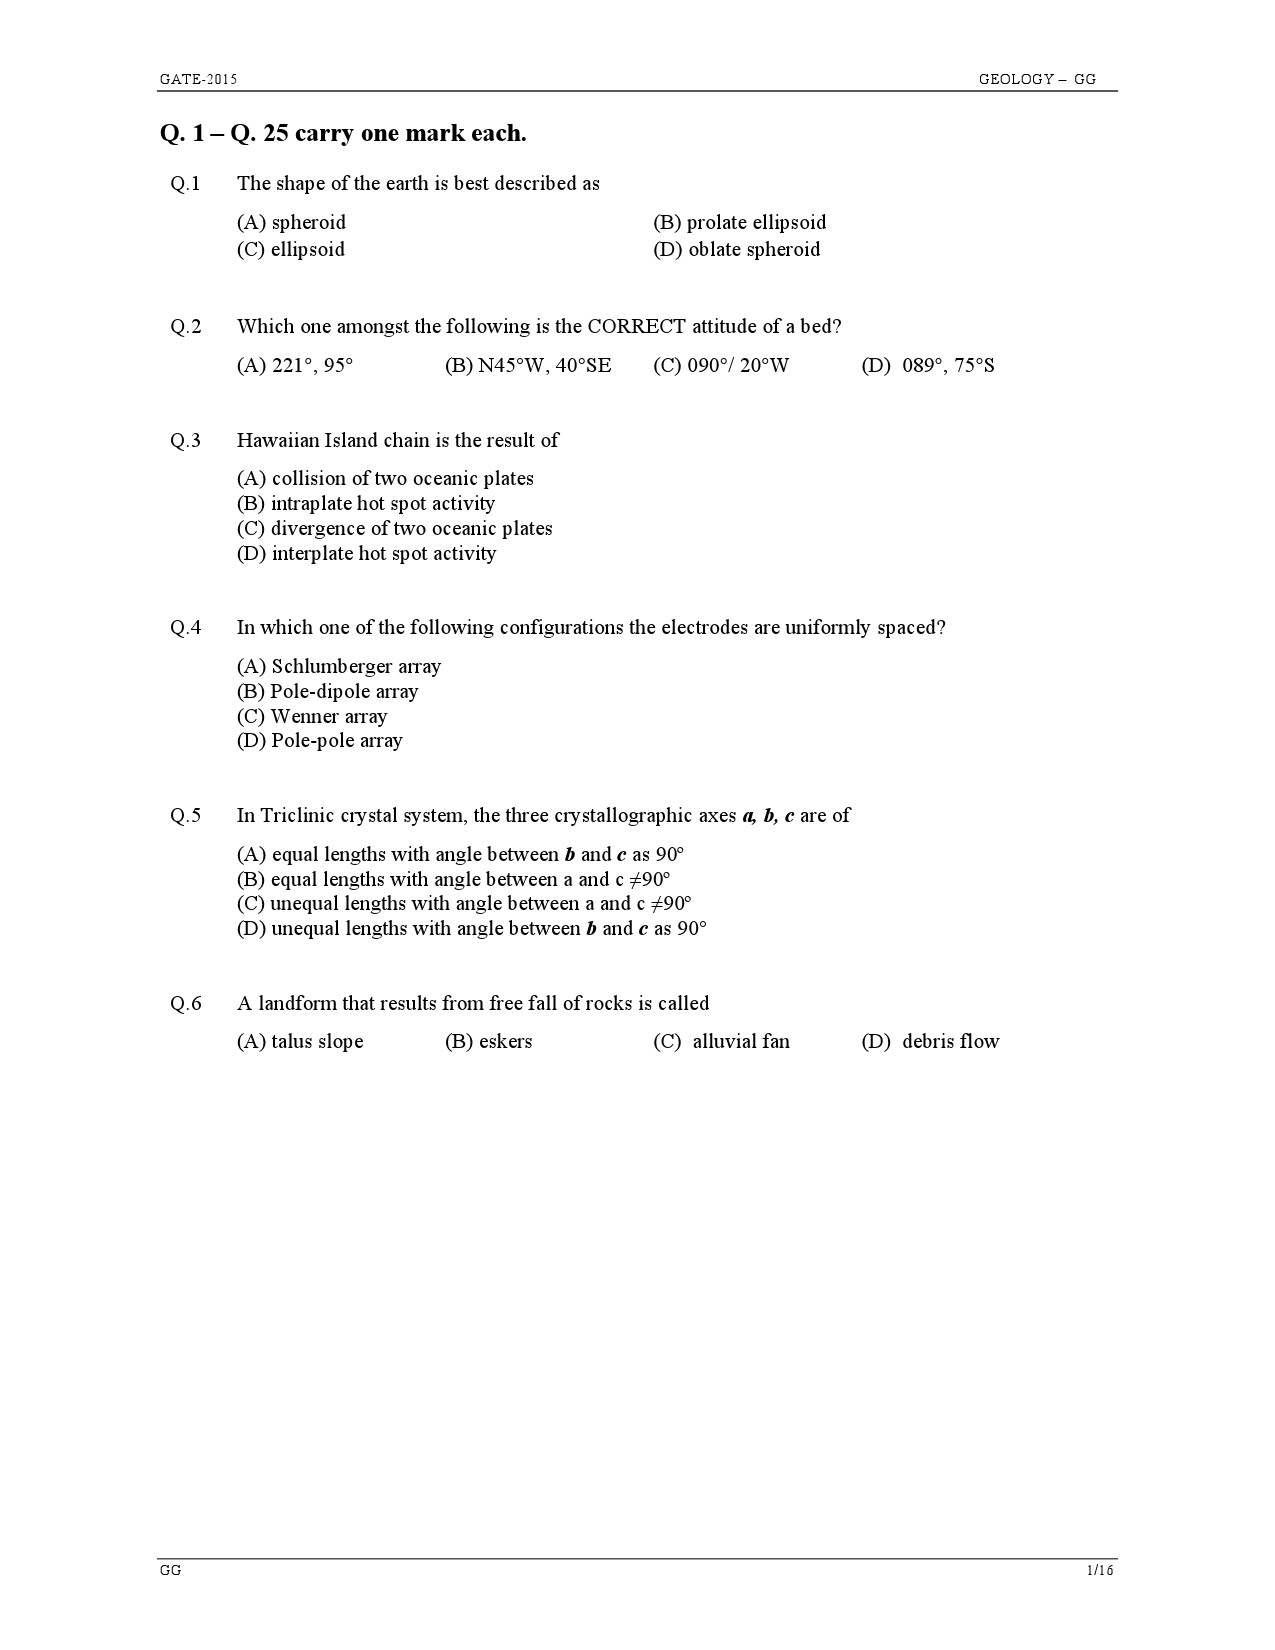 GATE Exam Question Paper 2015 Geology and Geophysics 1